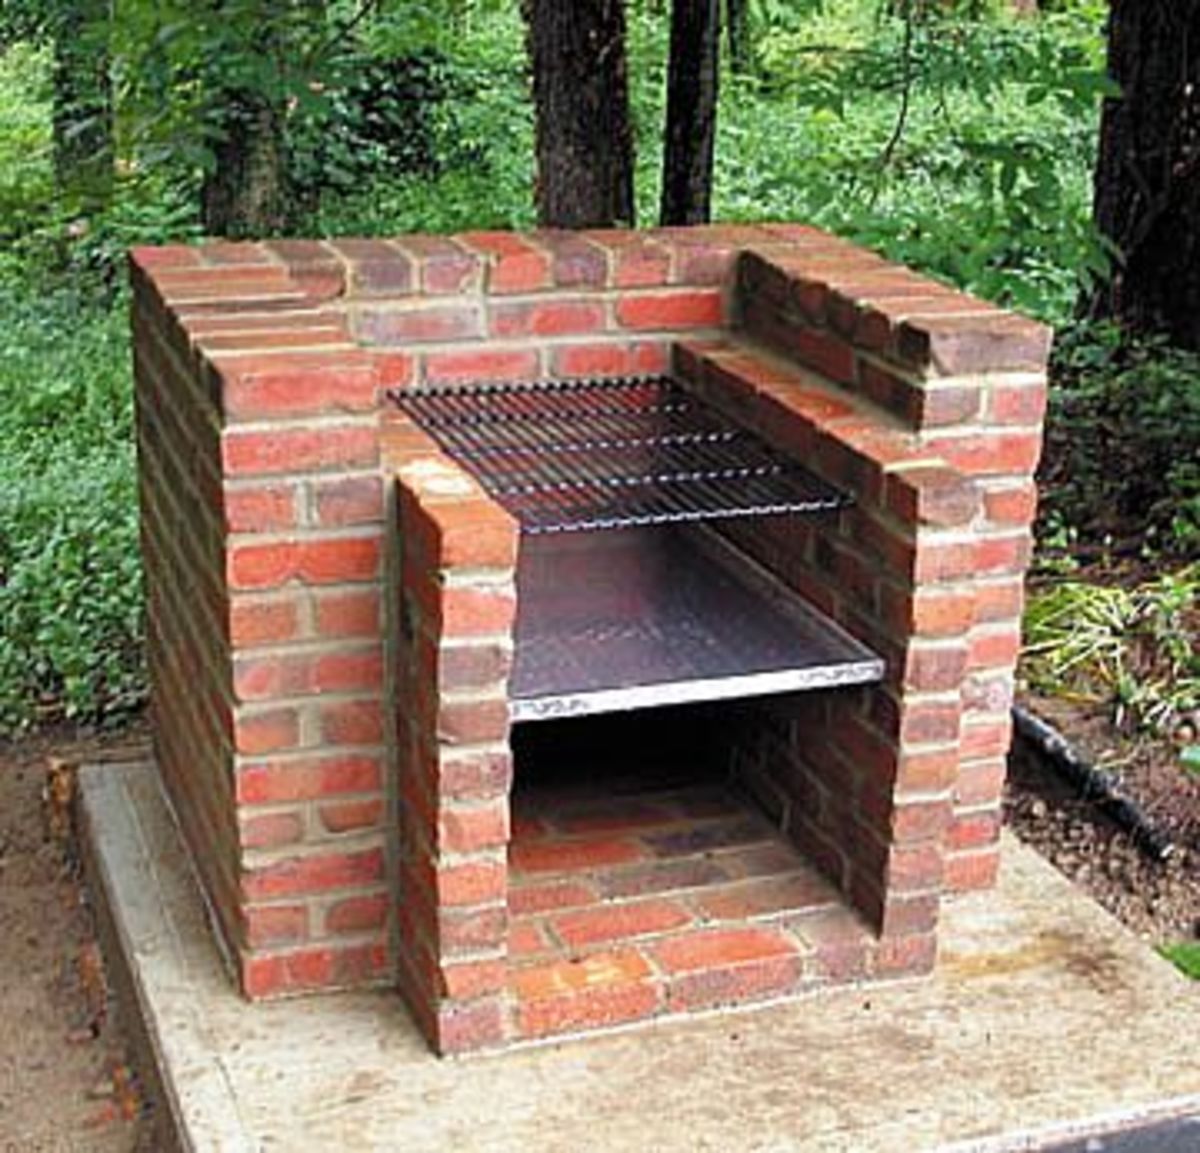 How To Build An Outdoor Brick Bbq Grill, Outdoor Brick Barbecue Kit